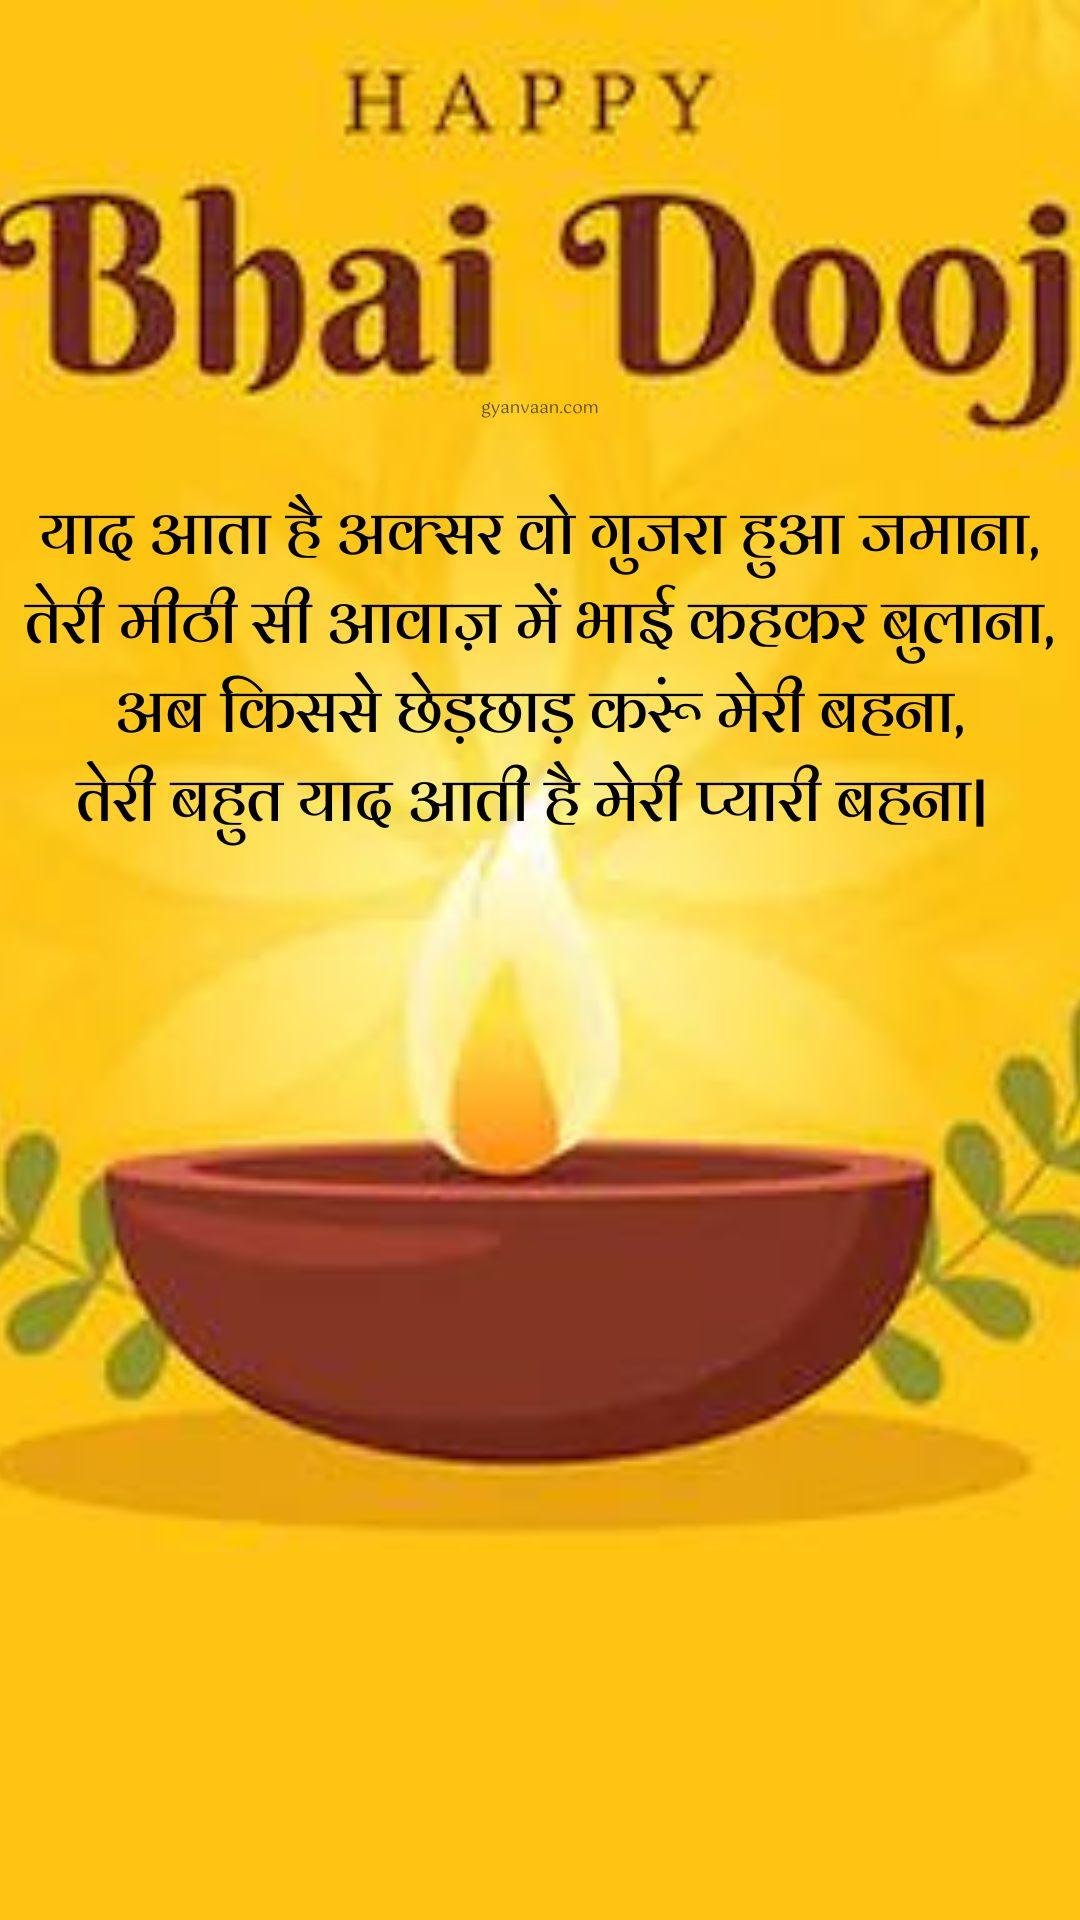 Happy Bhai Dooj Wishes In Hindi With Quotes Status Shubhkamnaye And Messages For Mobile 20 - Bhai Dooj Wishes In Hindi